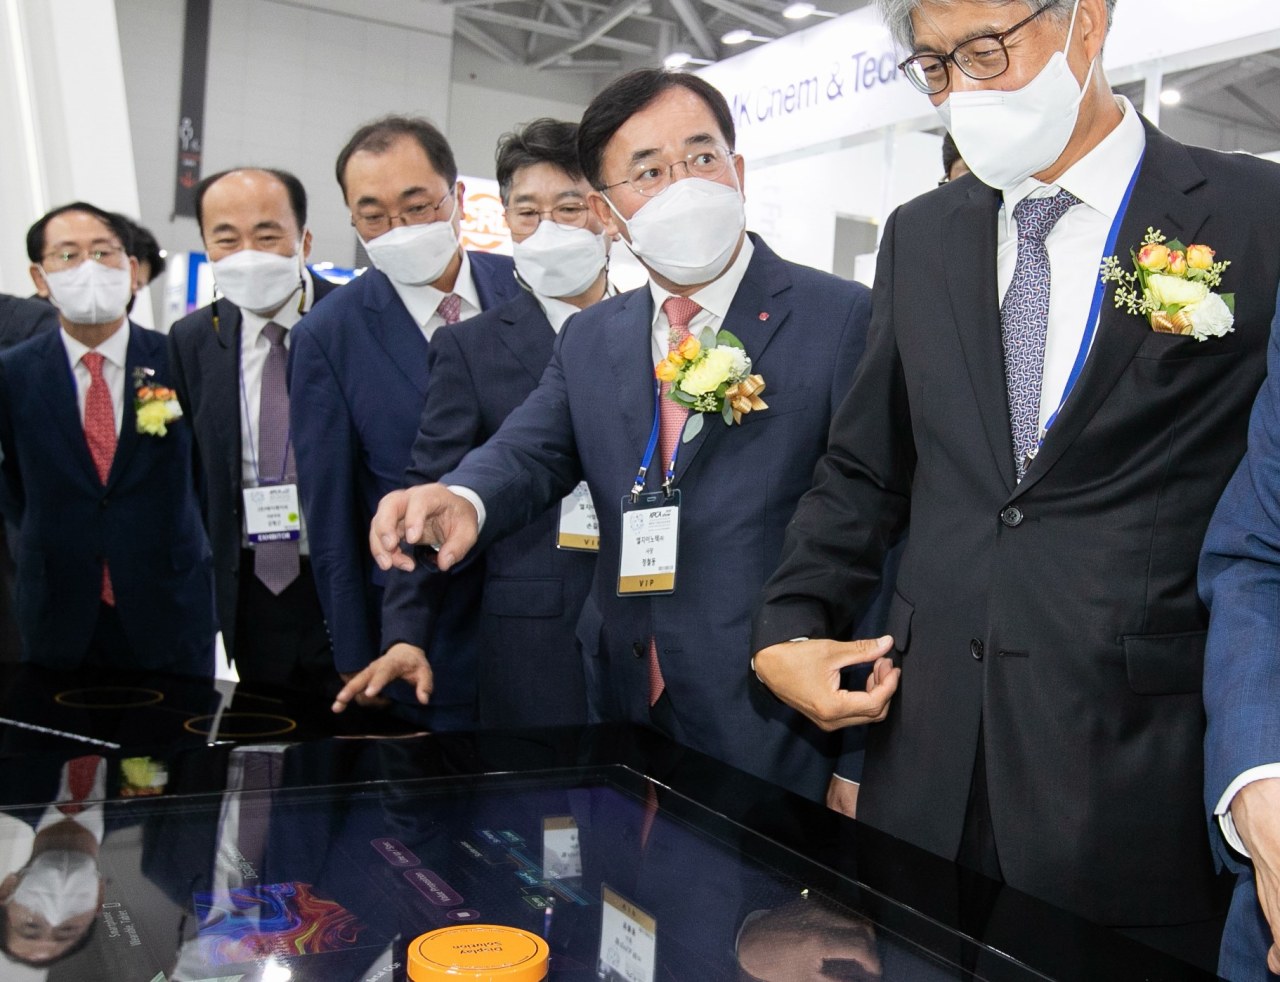 CEO Jeong Cheol-dong (second from right) looks at new products at KPCA show 2021 in Songdo, Incheon, on Wednesday. (LG Innotek)